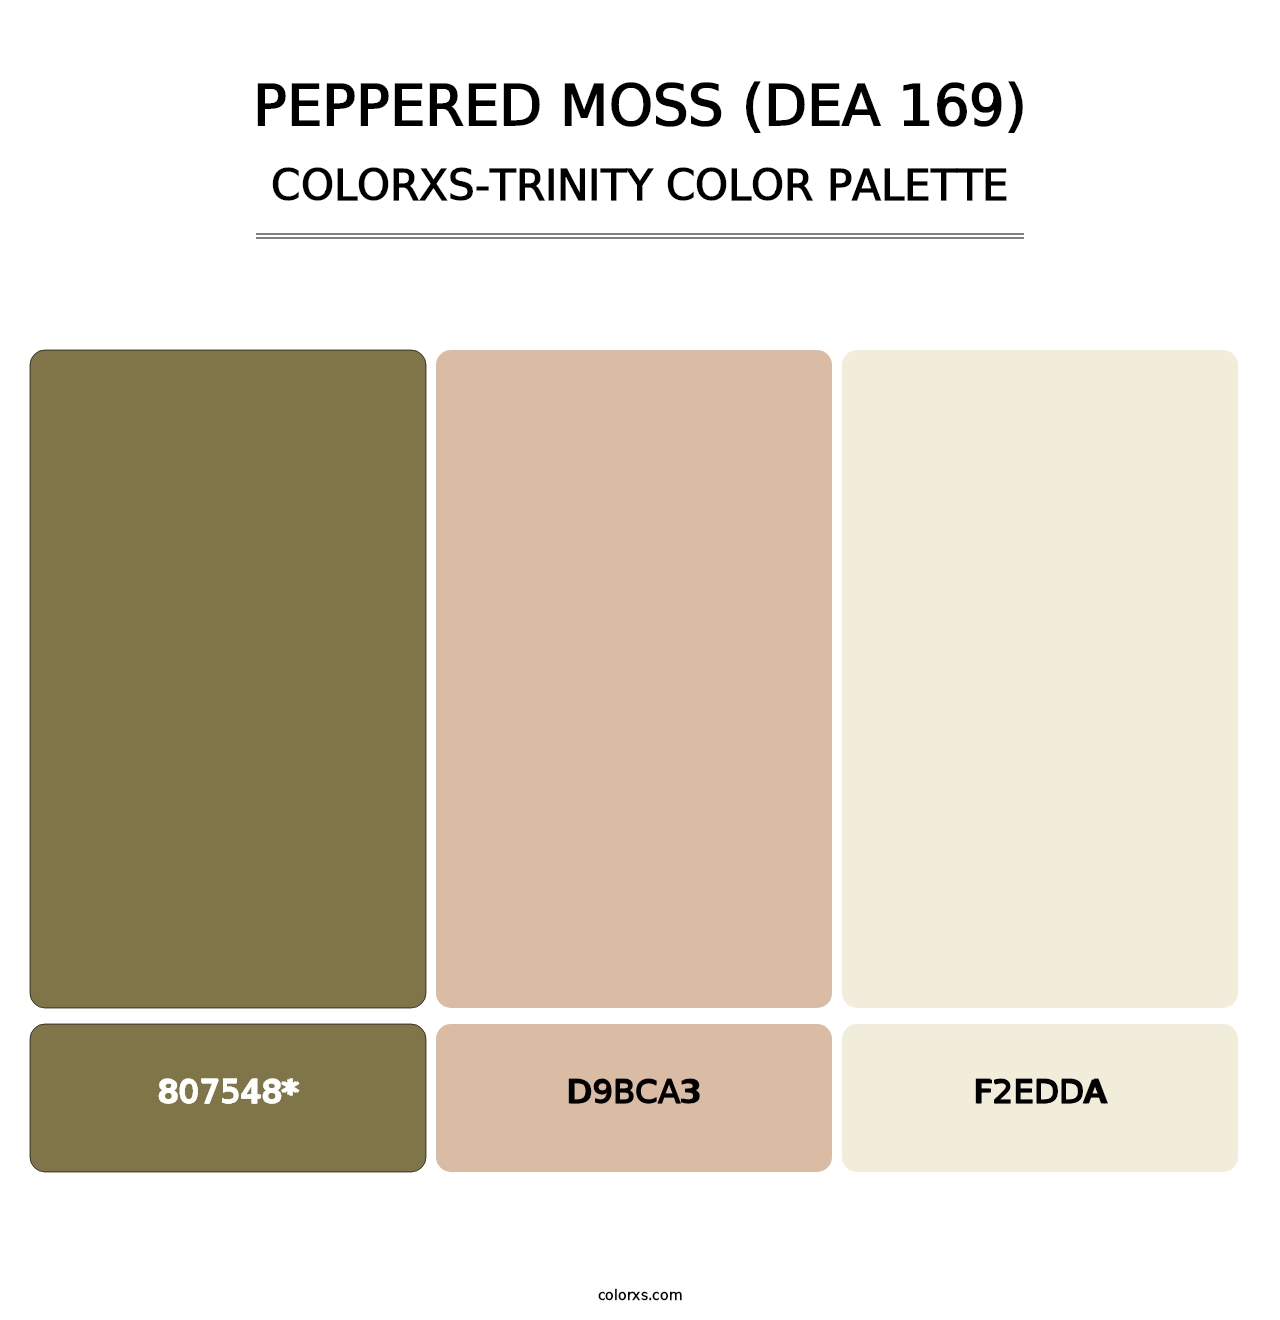 Peppered Moss (DEA 169) - Colorxs Trinity Palette